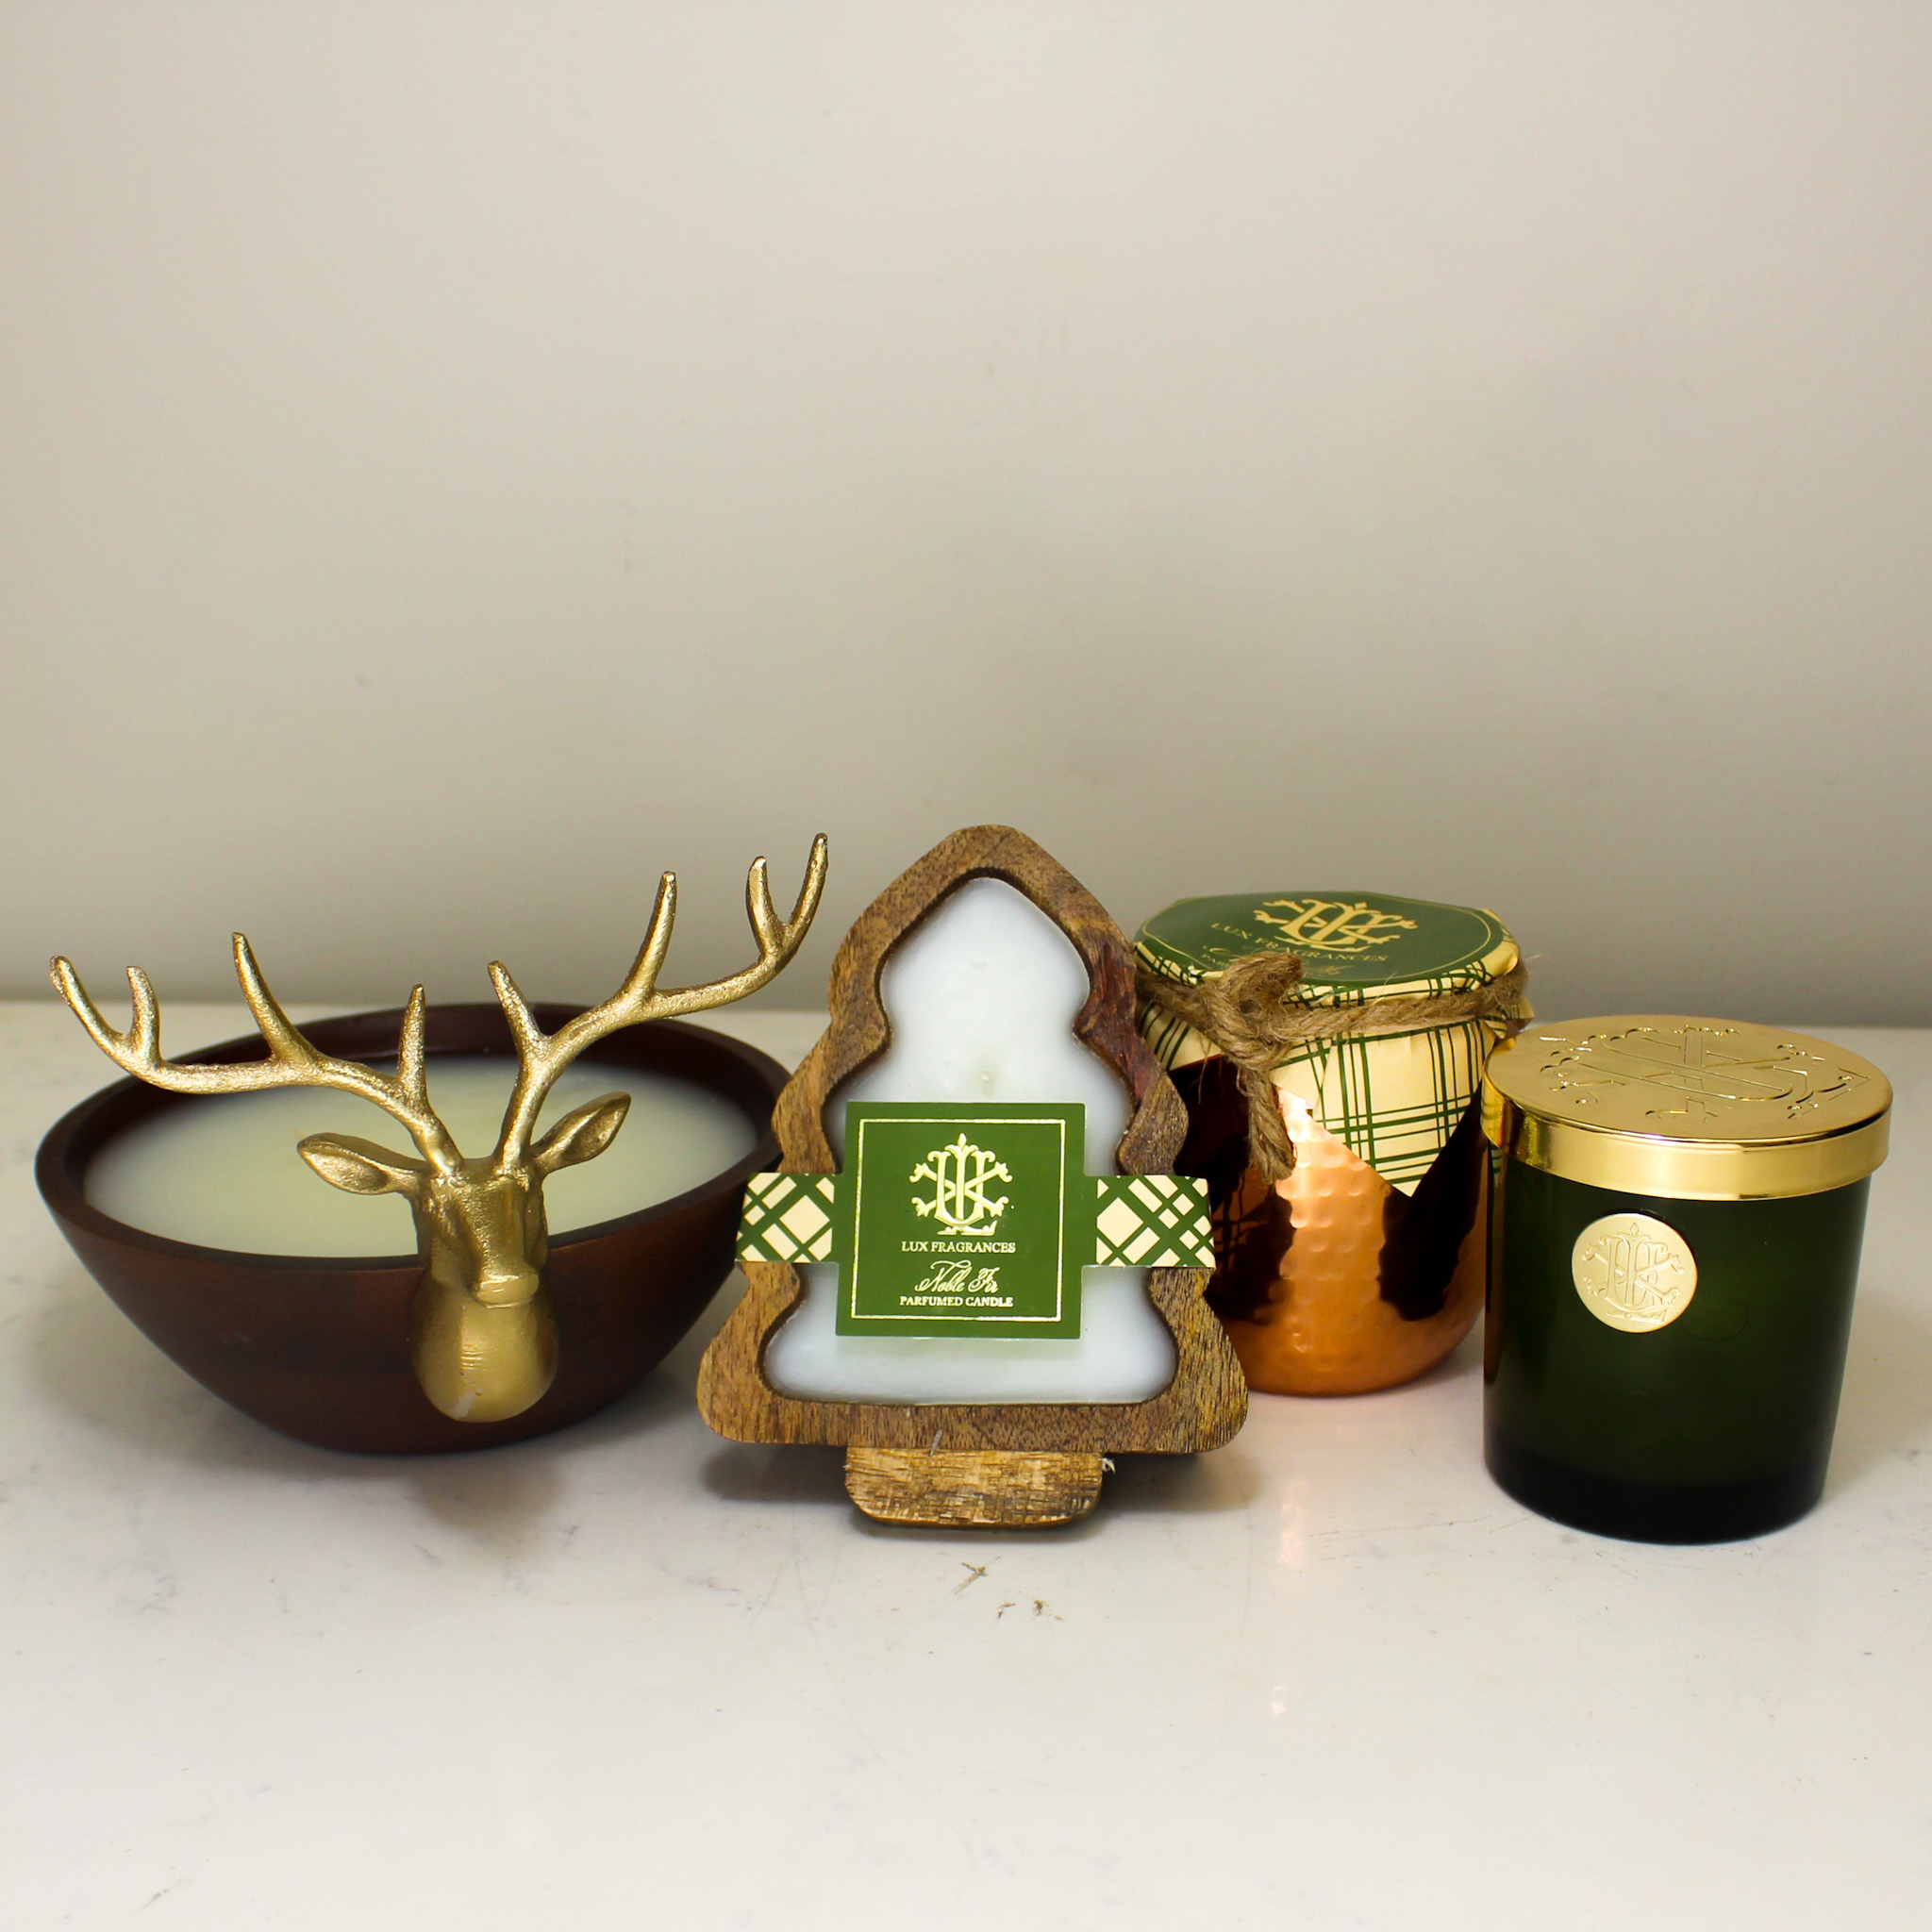 Lux Fragrances “Noble Fir” Scented Candle